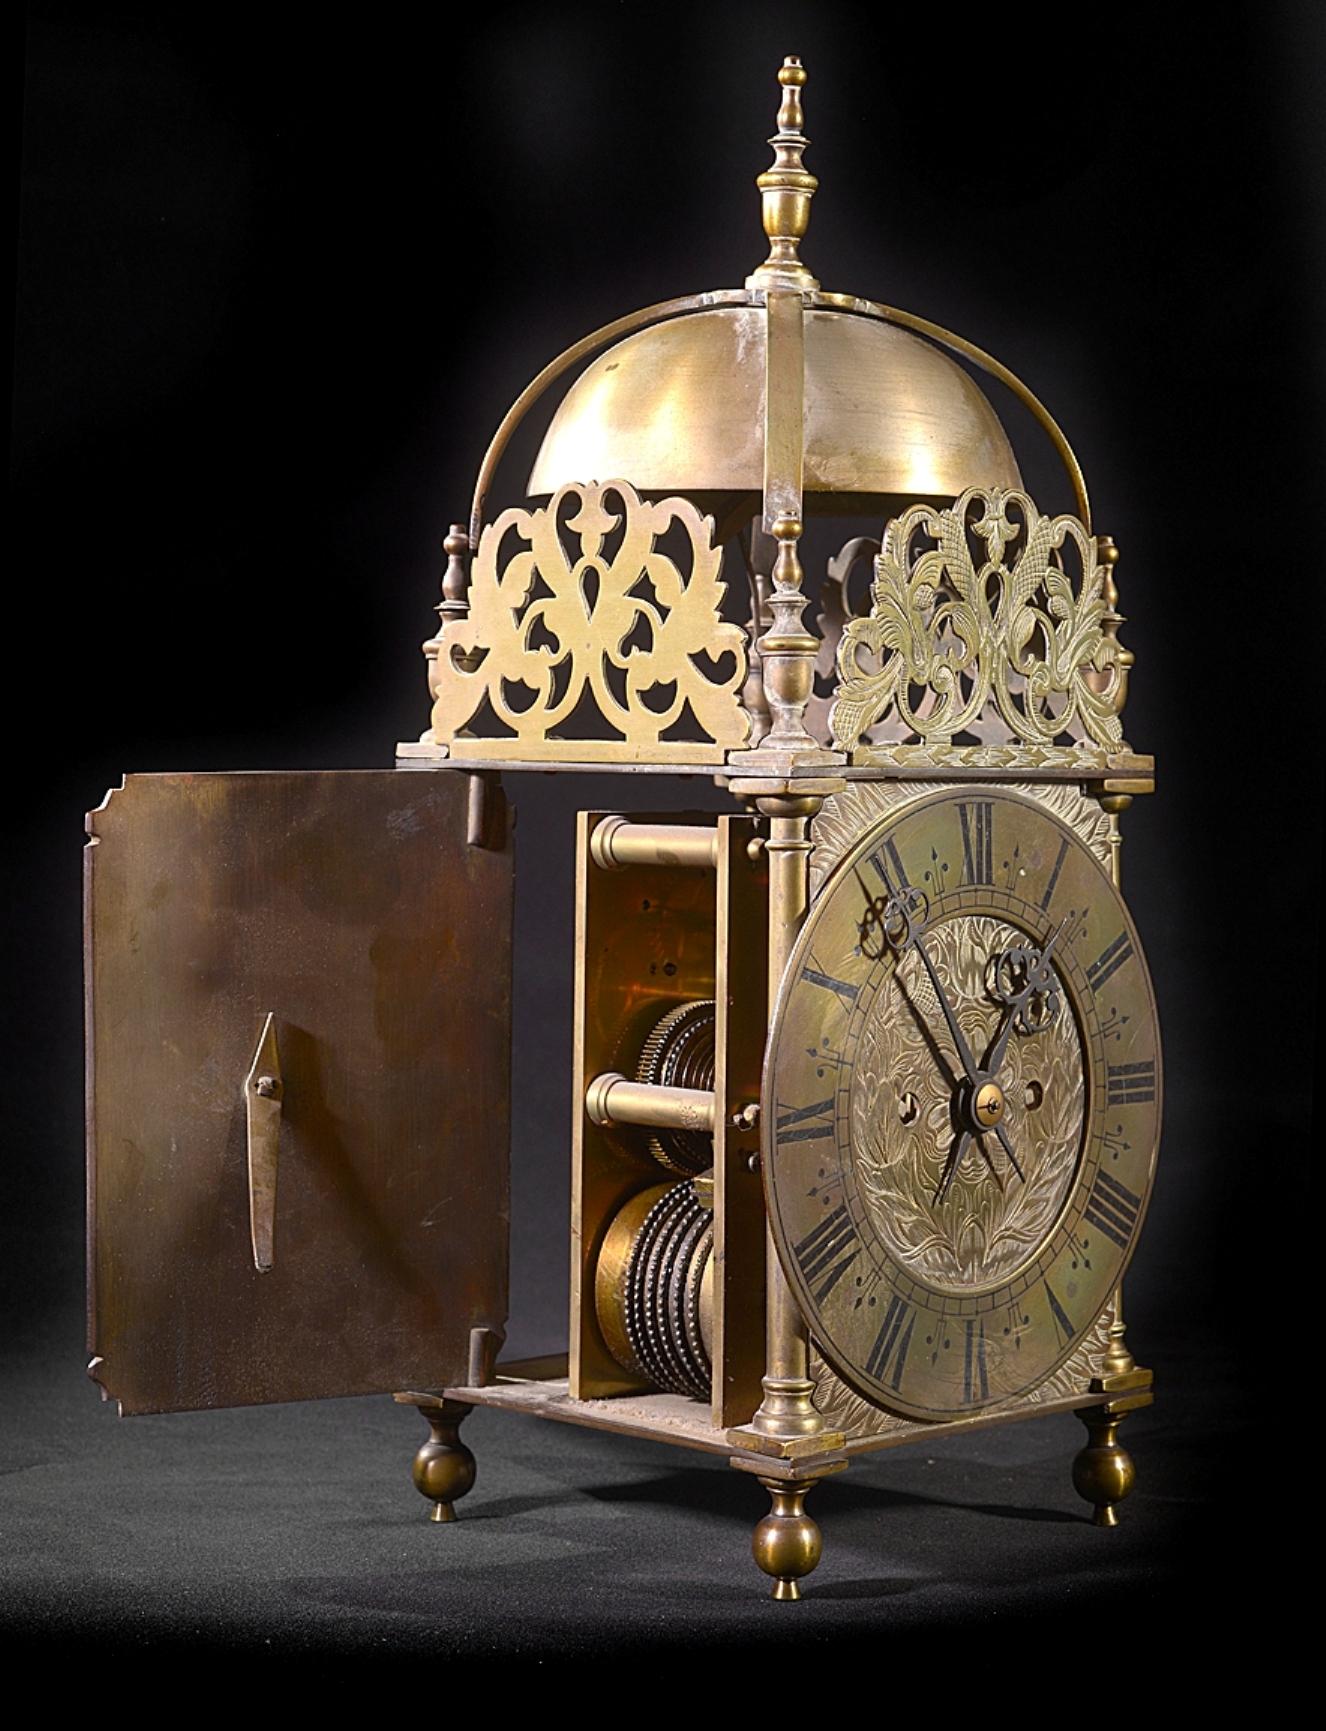 Mid-19th Century Eight Day Lantern Clock with a Double Fusee Striking Movement In Good Condition For Sale In Hemel Hempstead, Hertfordshire